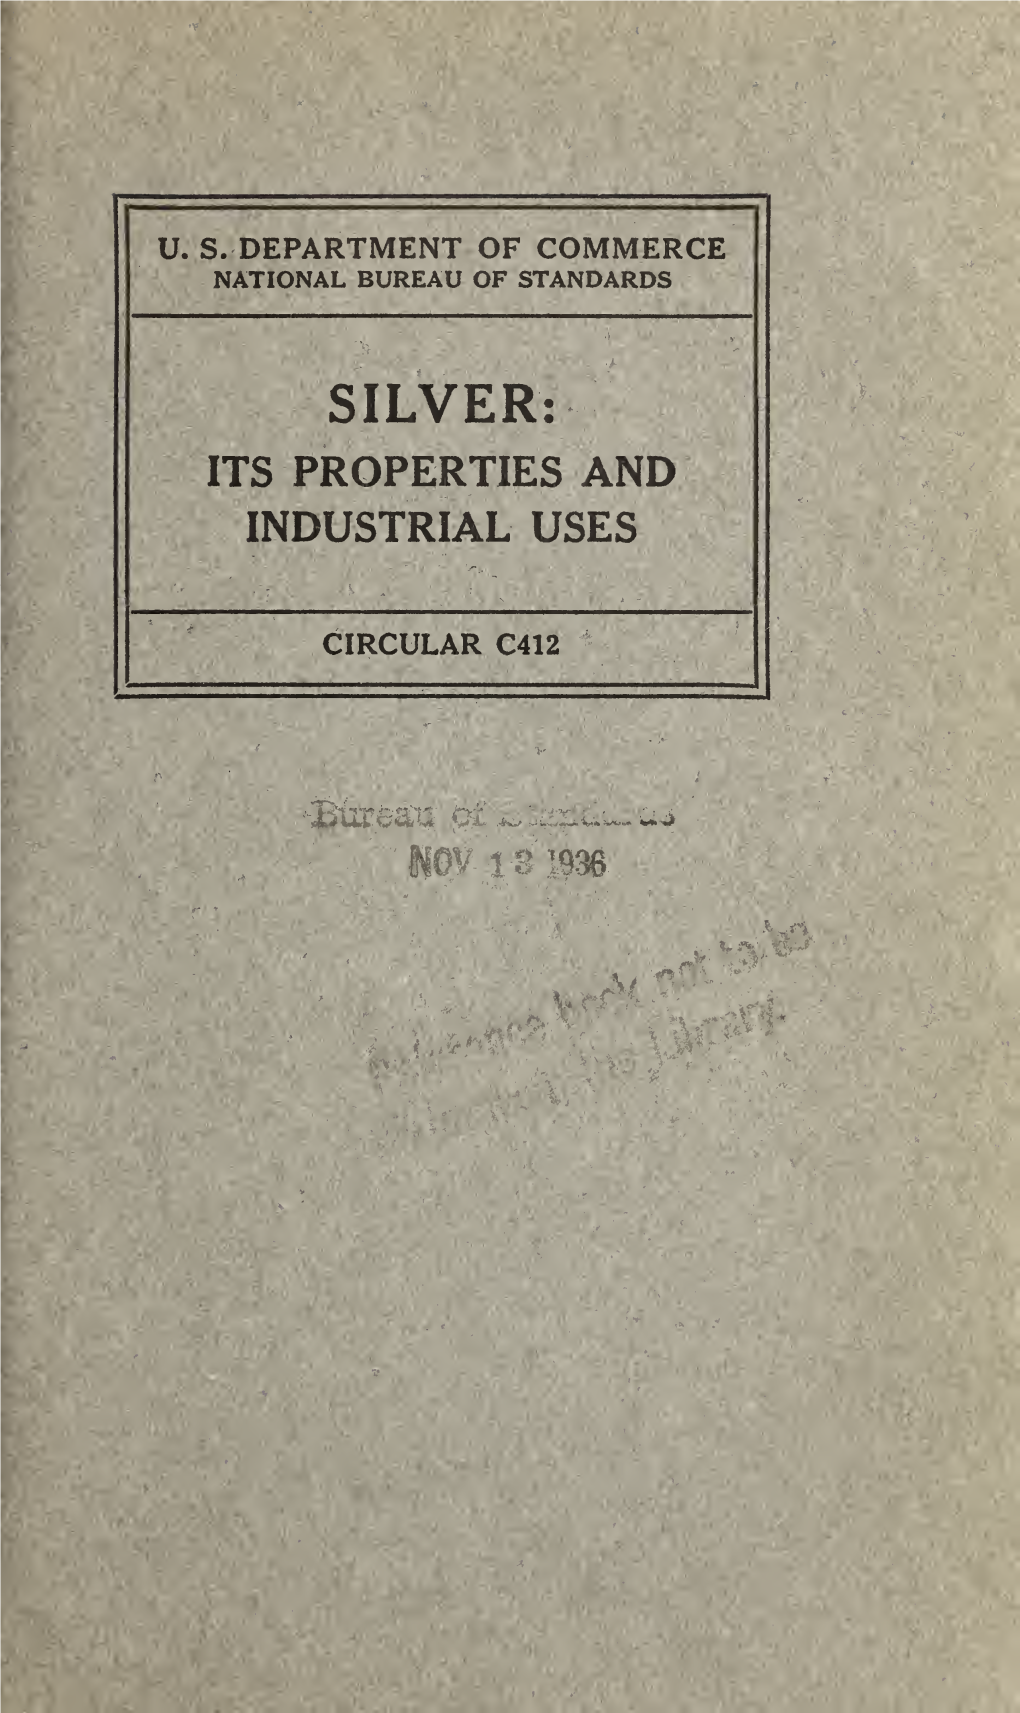 Silver: Its Properties and Industrial Uses